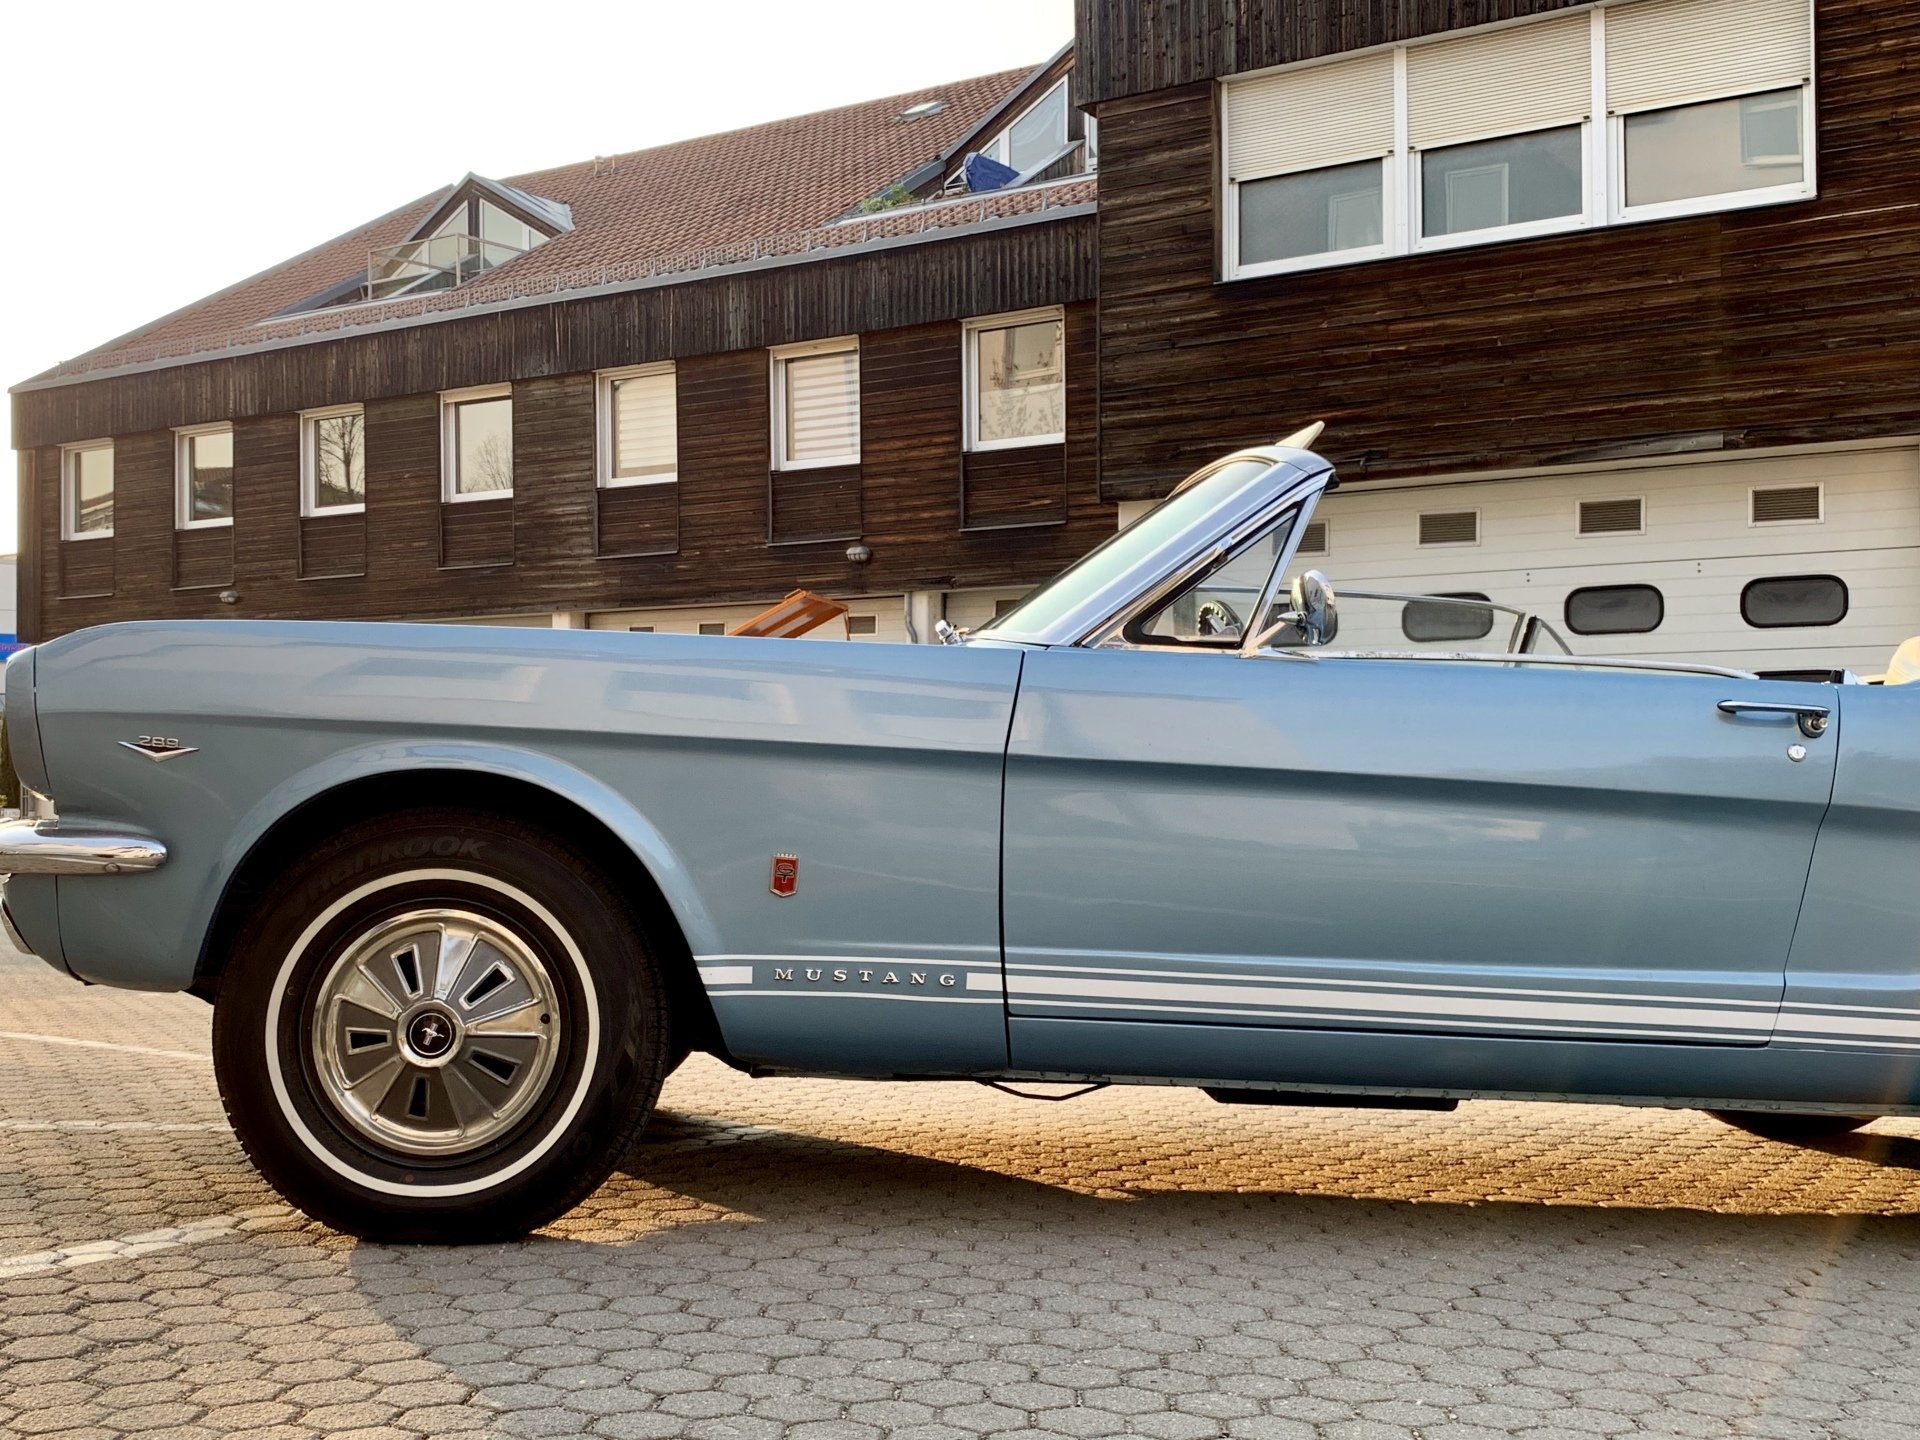 1966 Ford Mustang Cabrio V8 US car muscle car Oldtimer